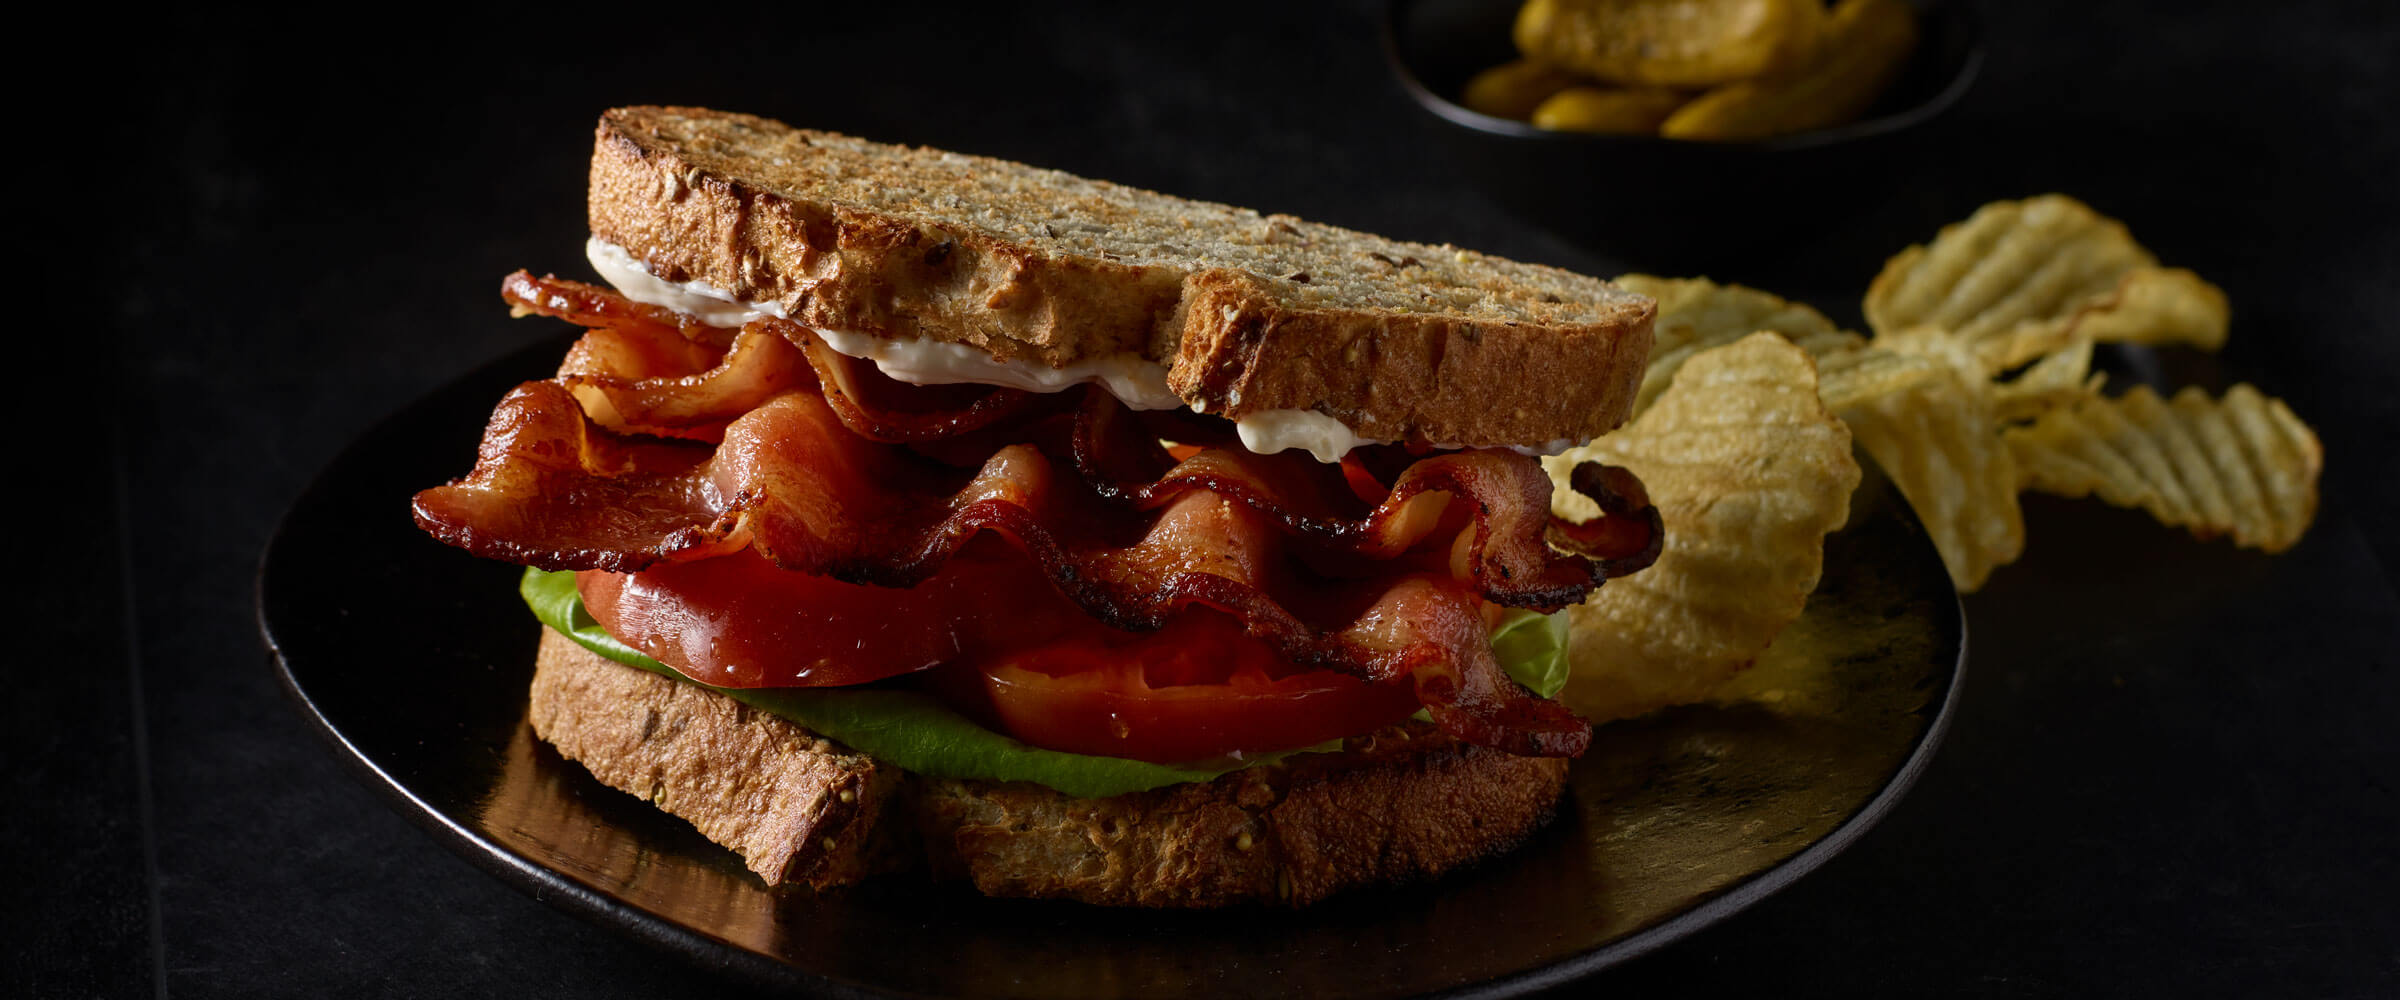 BLT on wheat bread with side of potato chips on black plate